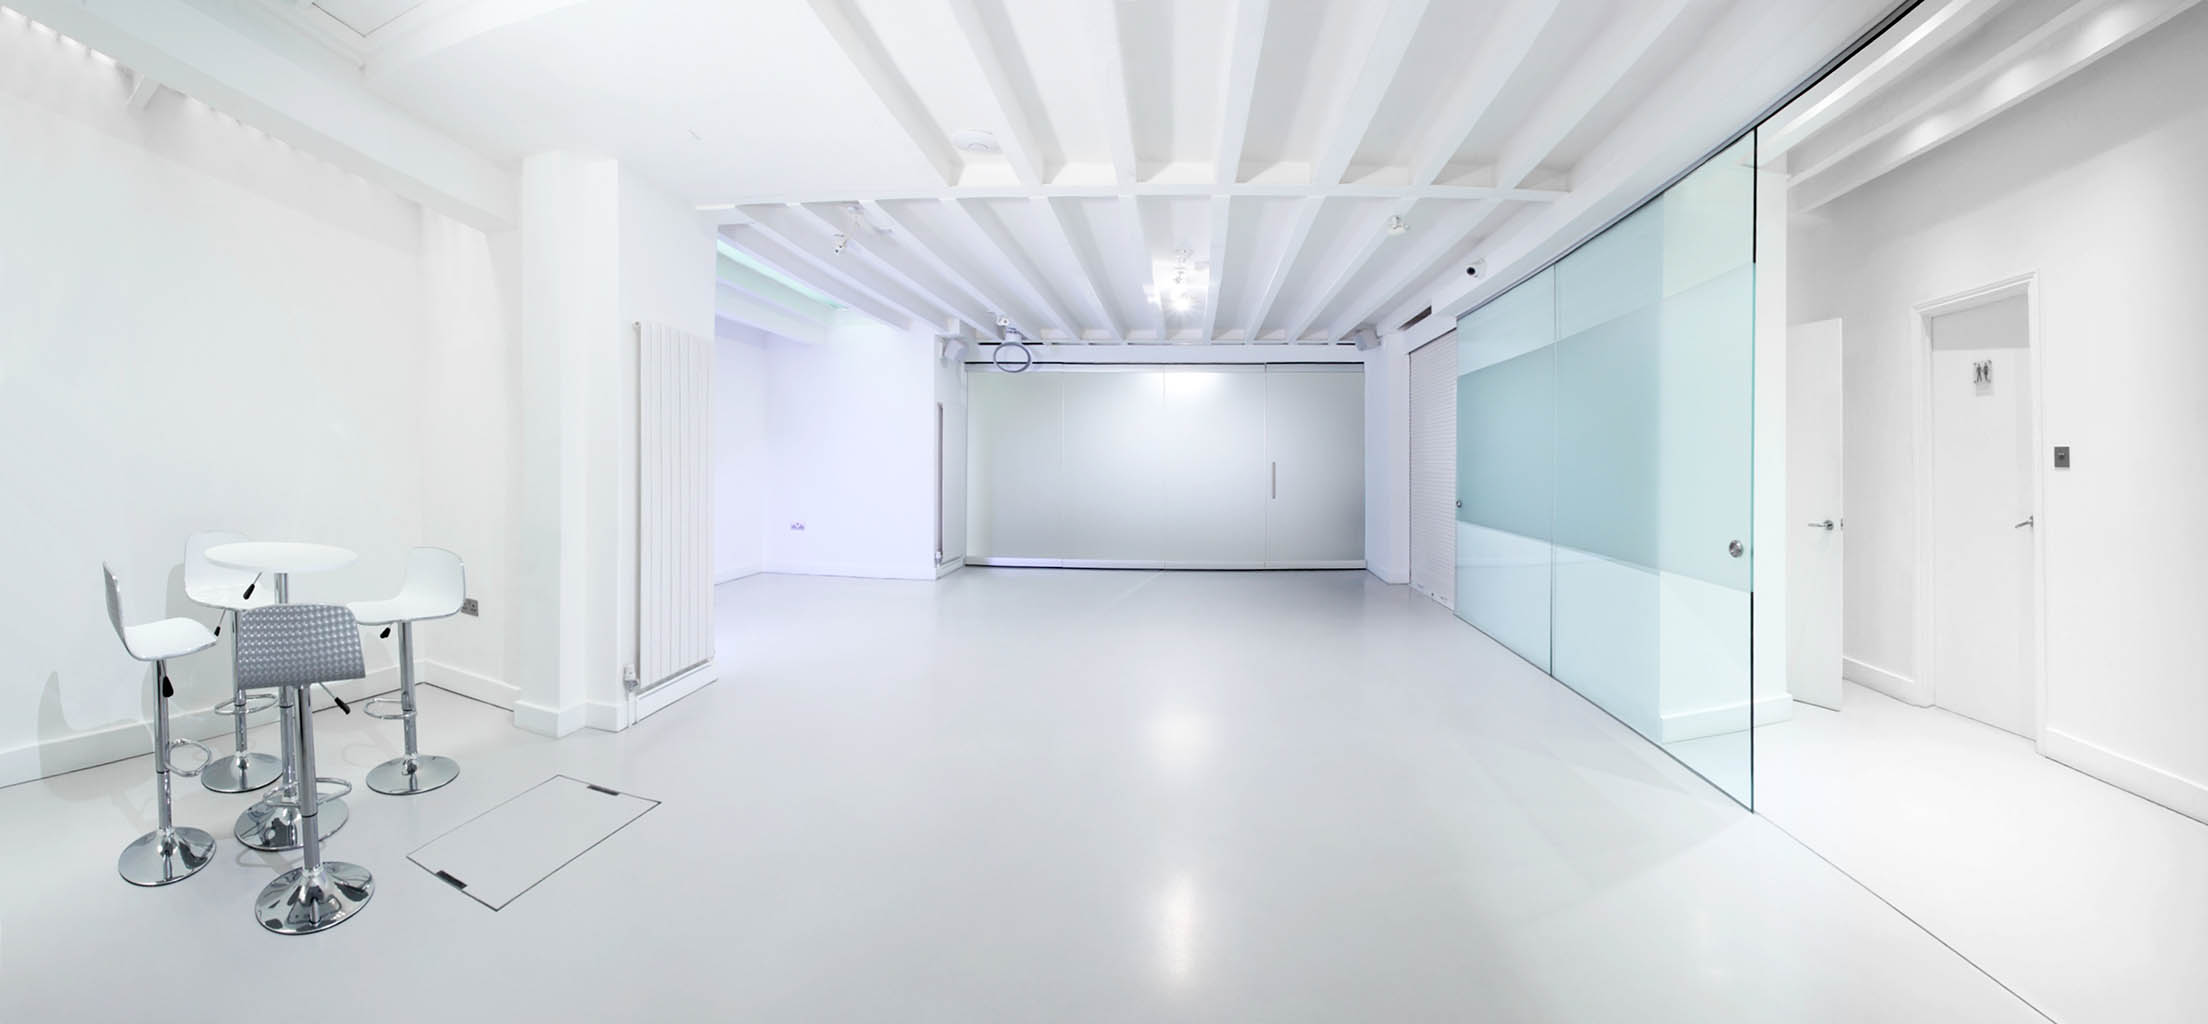 Basement sets floorspace of Packshot Factory's Central London Photography and Film studio